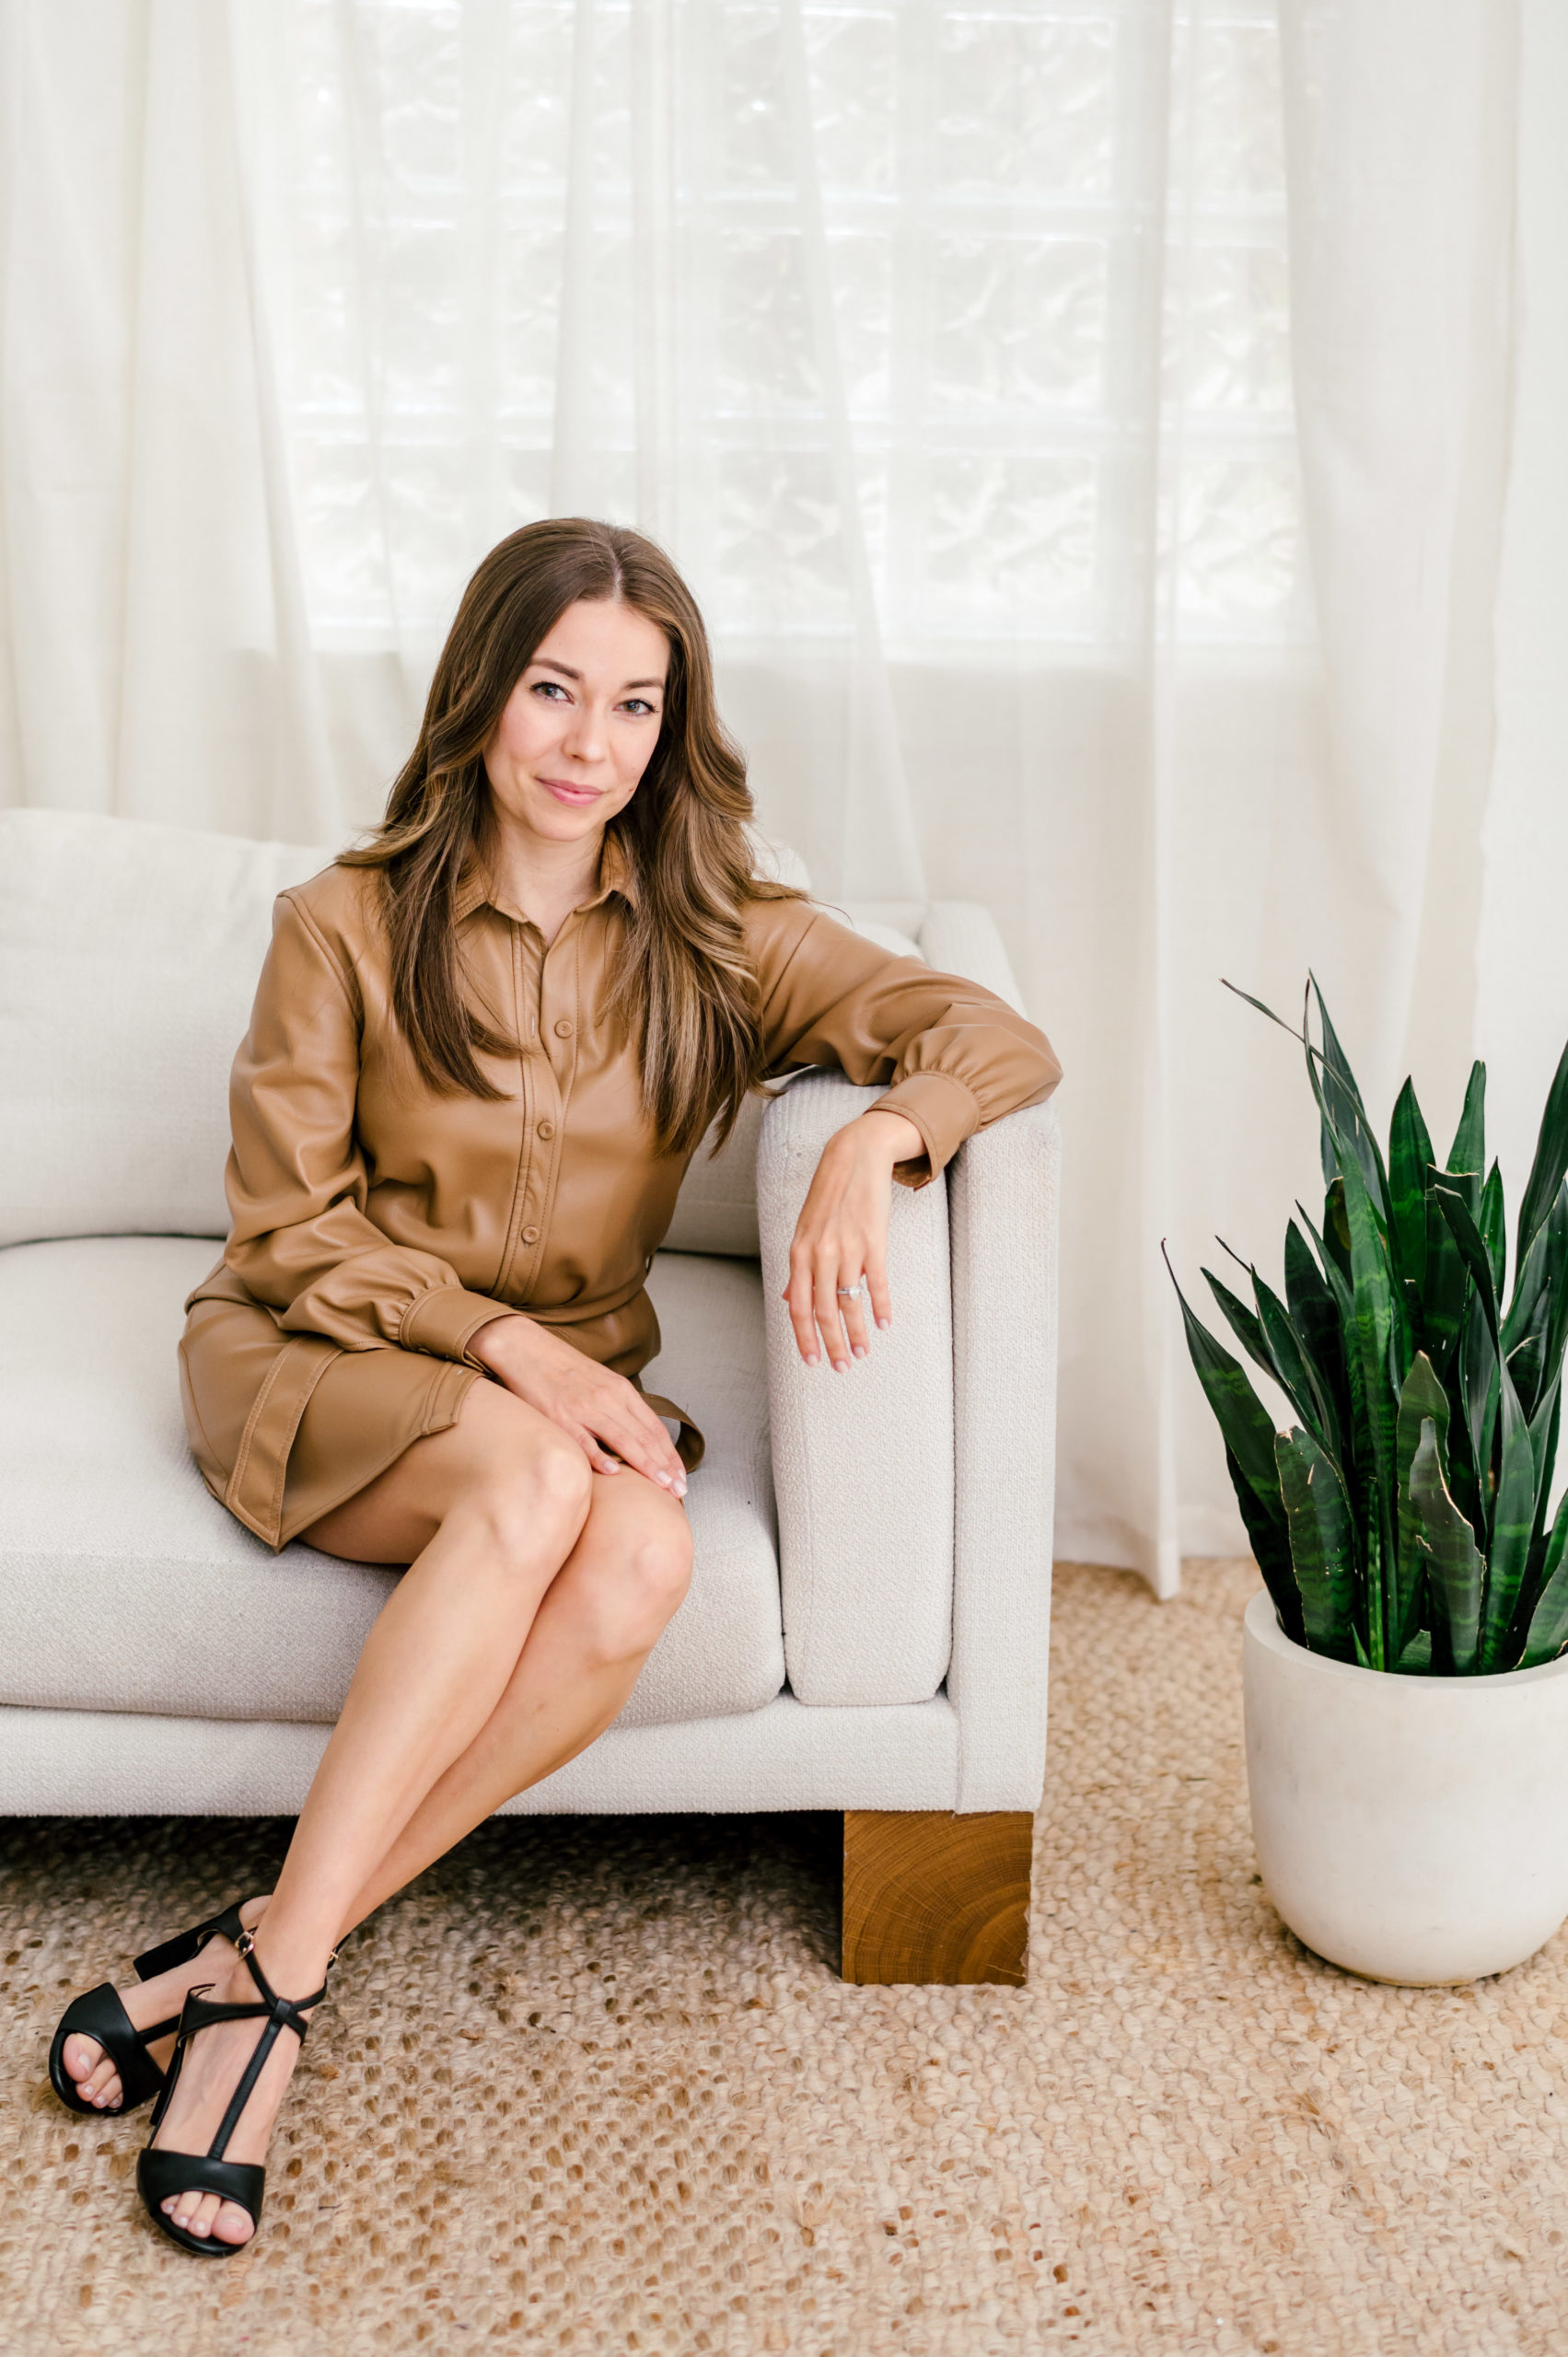 Woman in a leather dress sitting on a couch criss cross for her brand photography photos